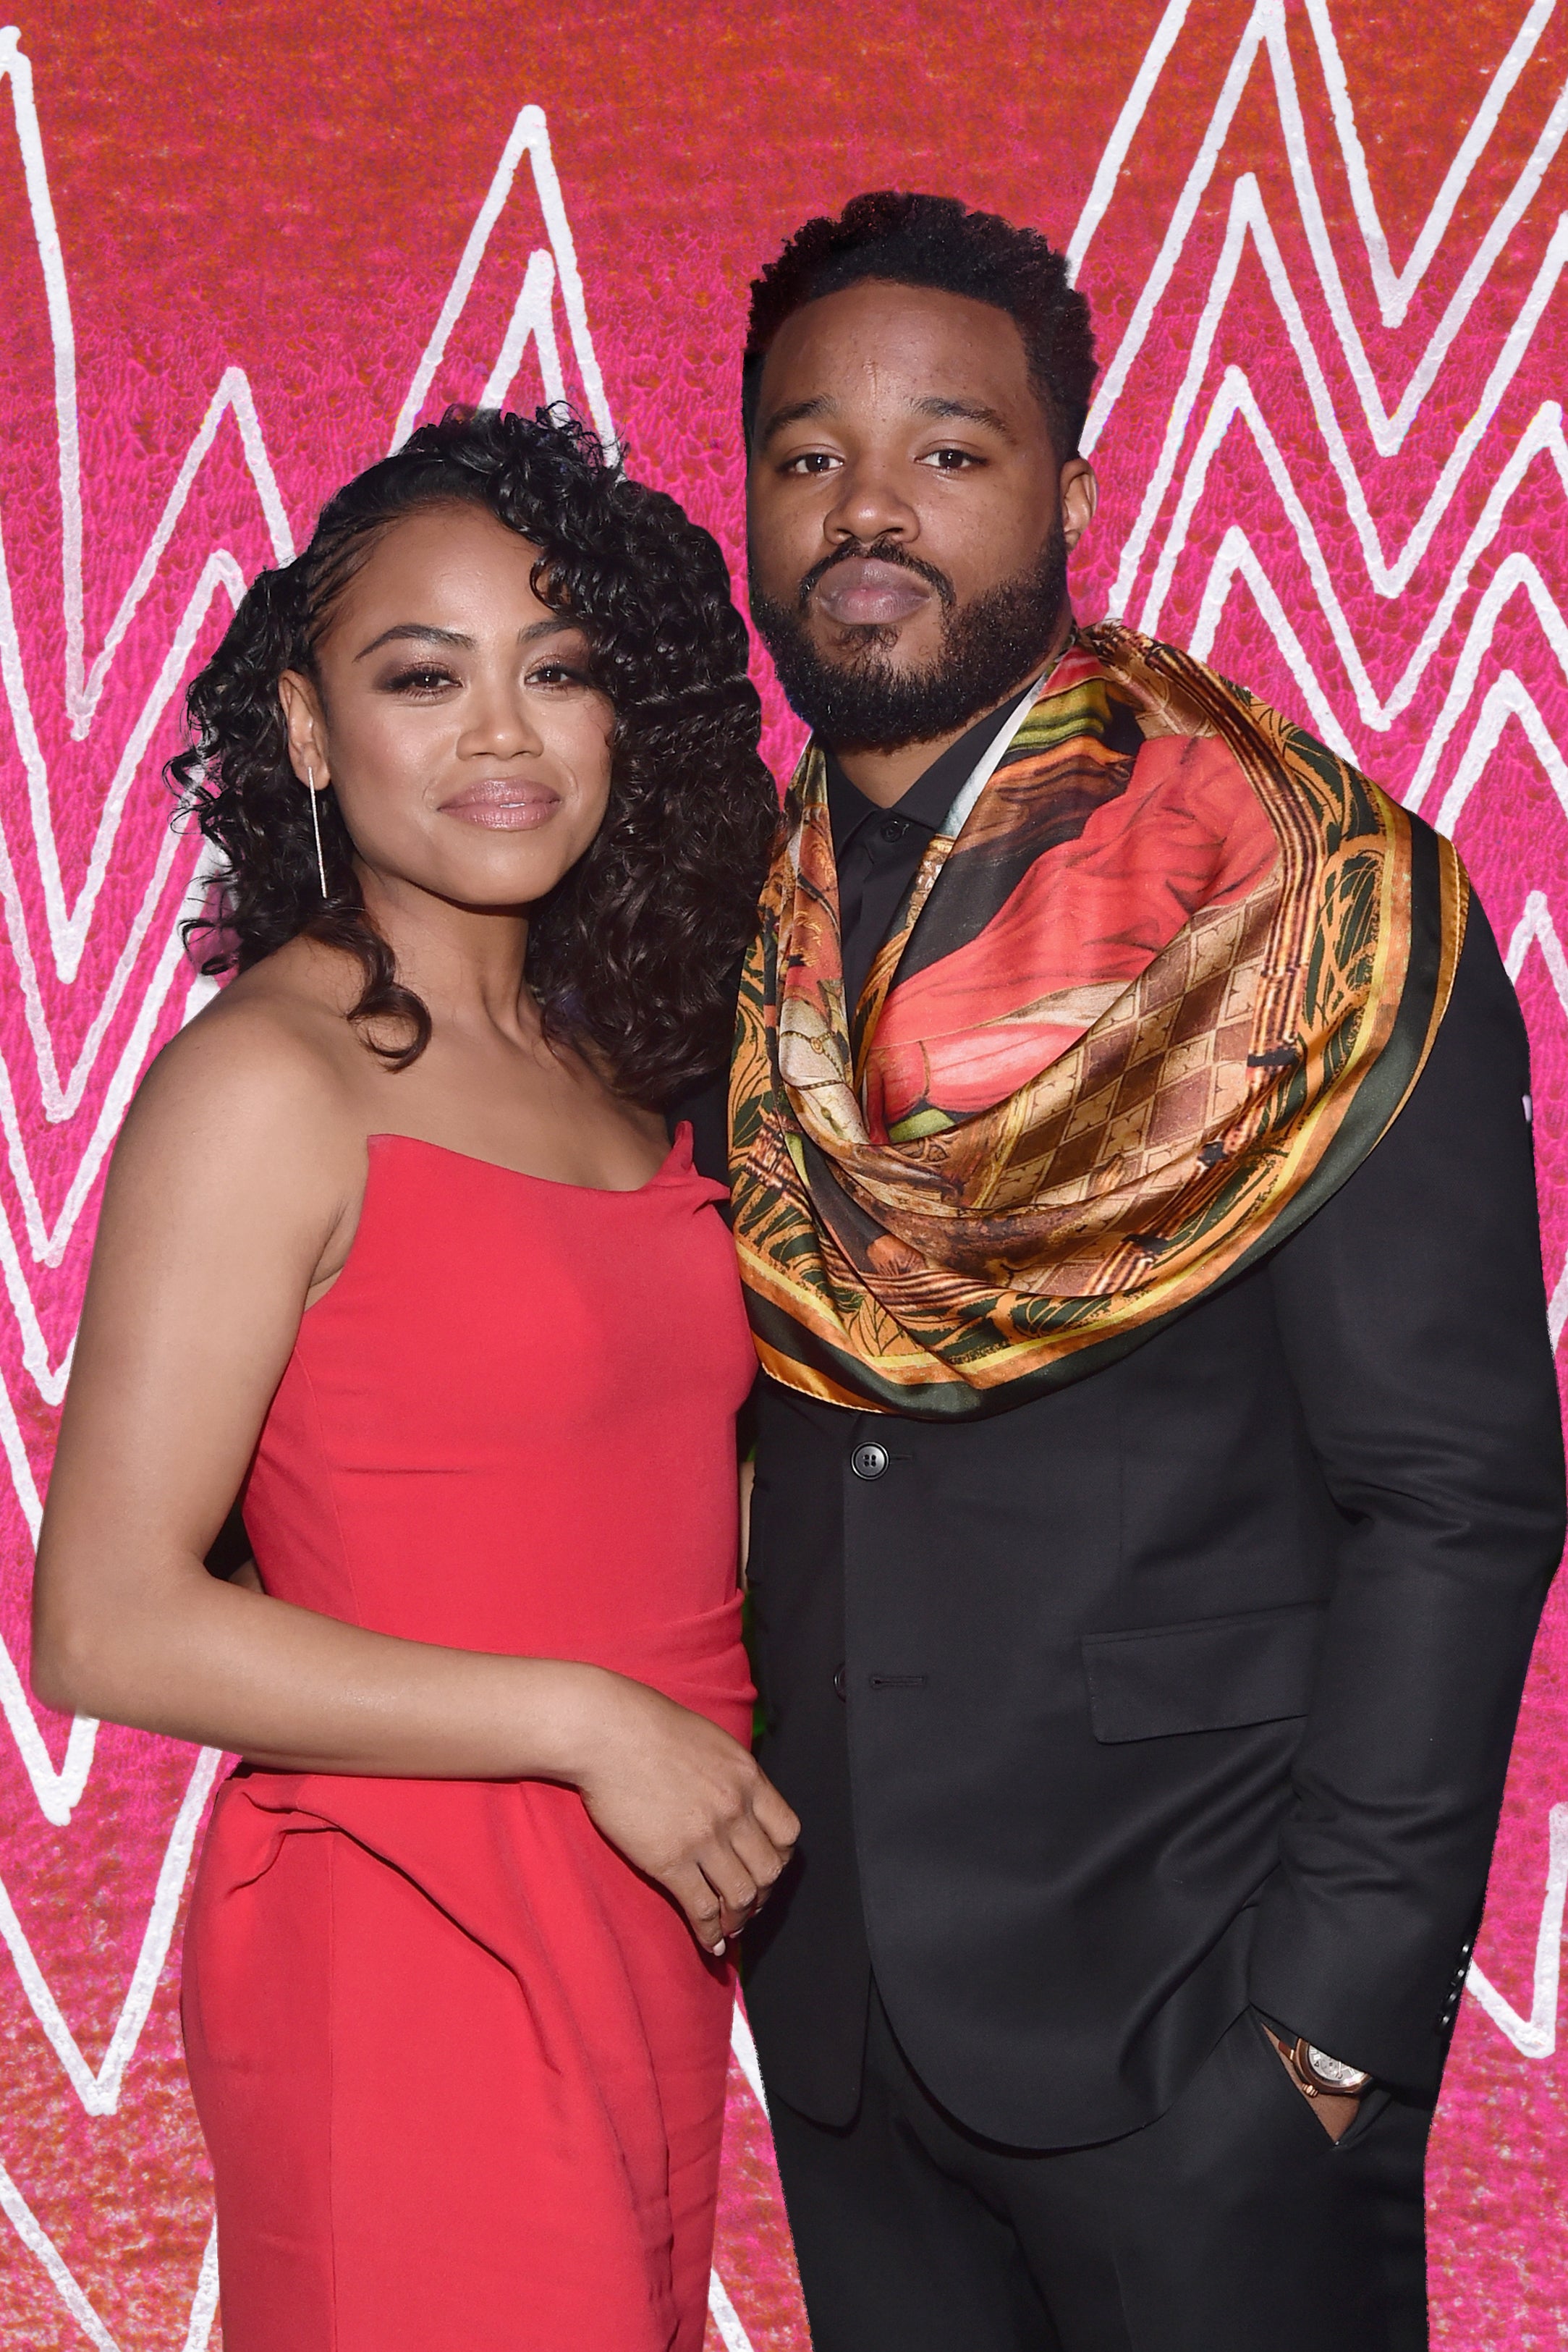 The Gift Ryan Coogler's Wife Zinzi Evans Got Him In College That Helped to Catapult His Dreams
